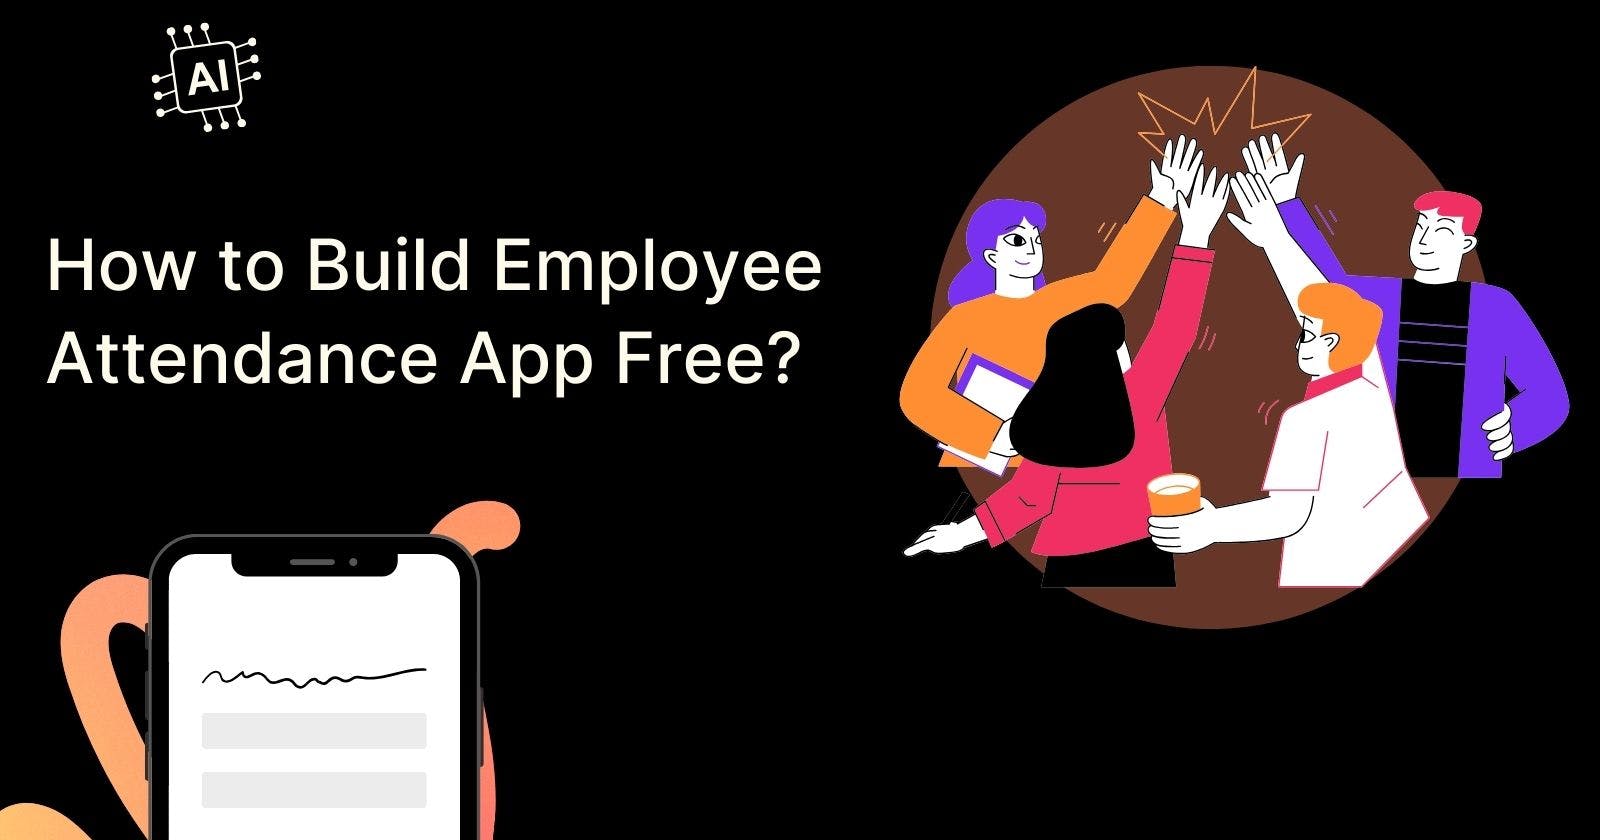 Build a Free Employee Attendance App with AI!